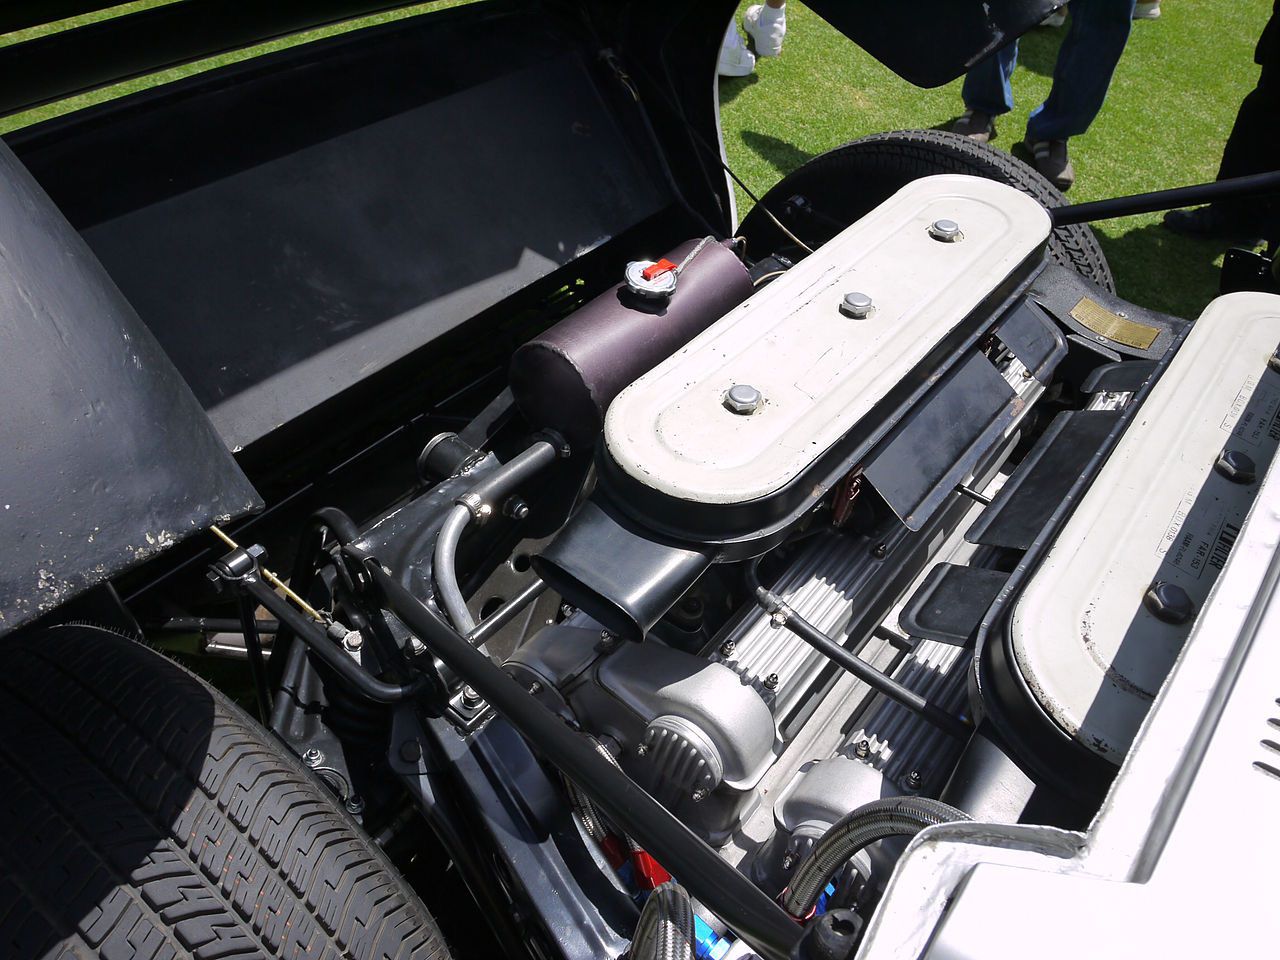 The Miura's engine in a P400 chassis, where it just fits into the body shell.